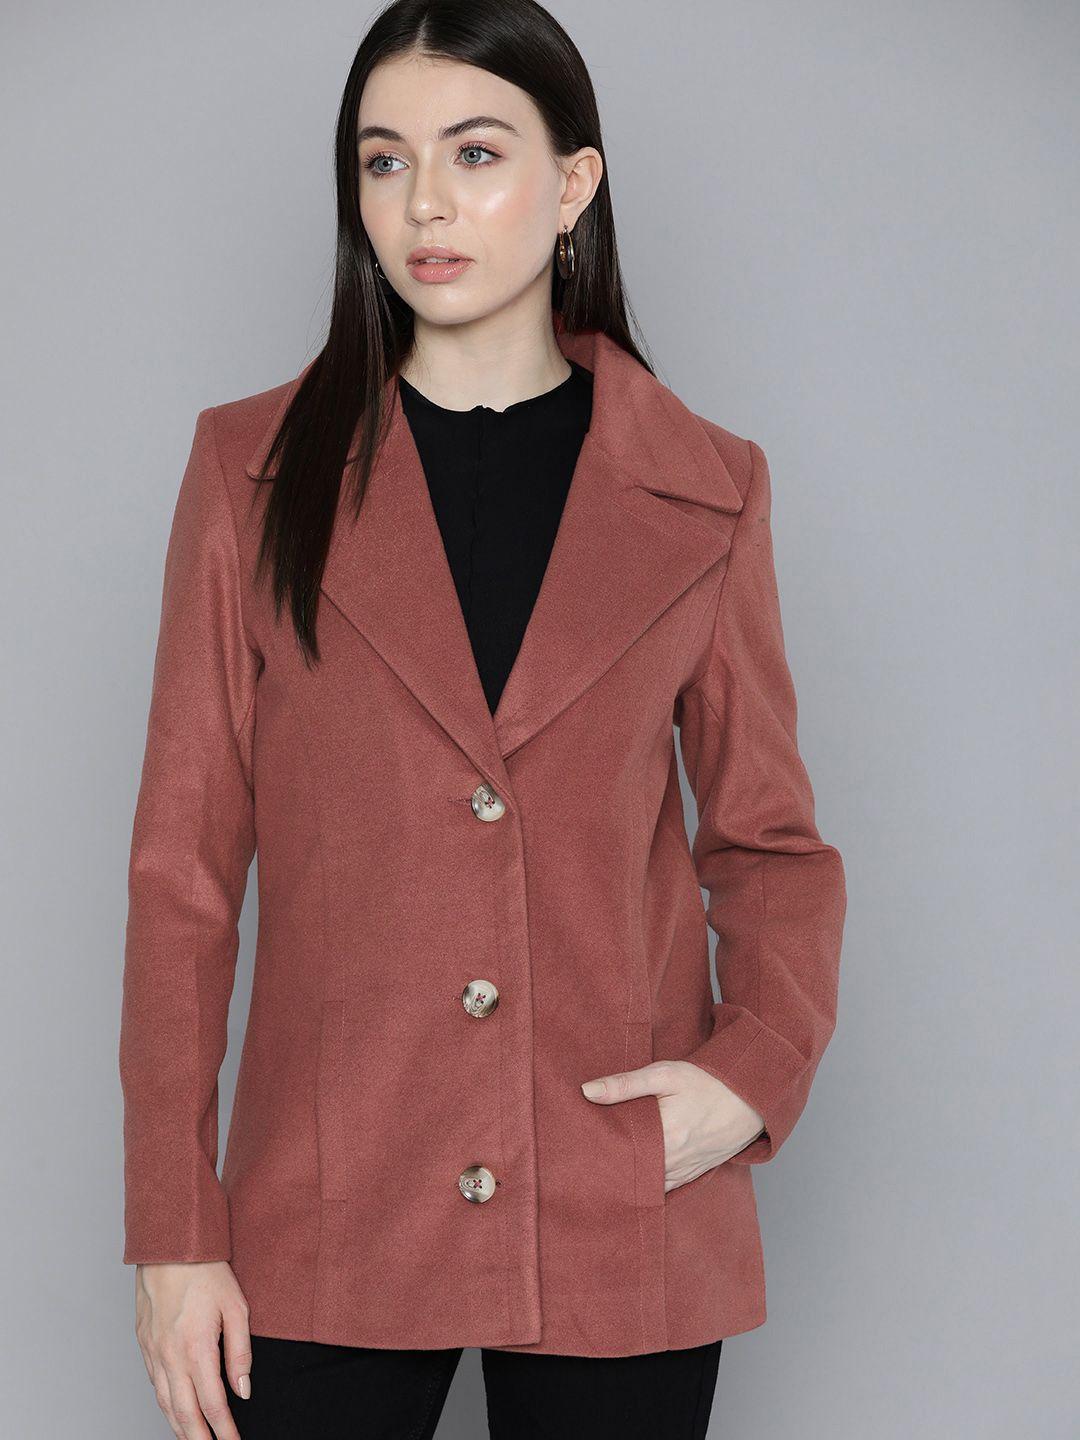 chemistry notched lapel collar single breasted overcoat